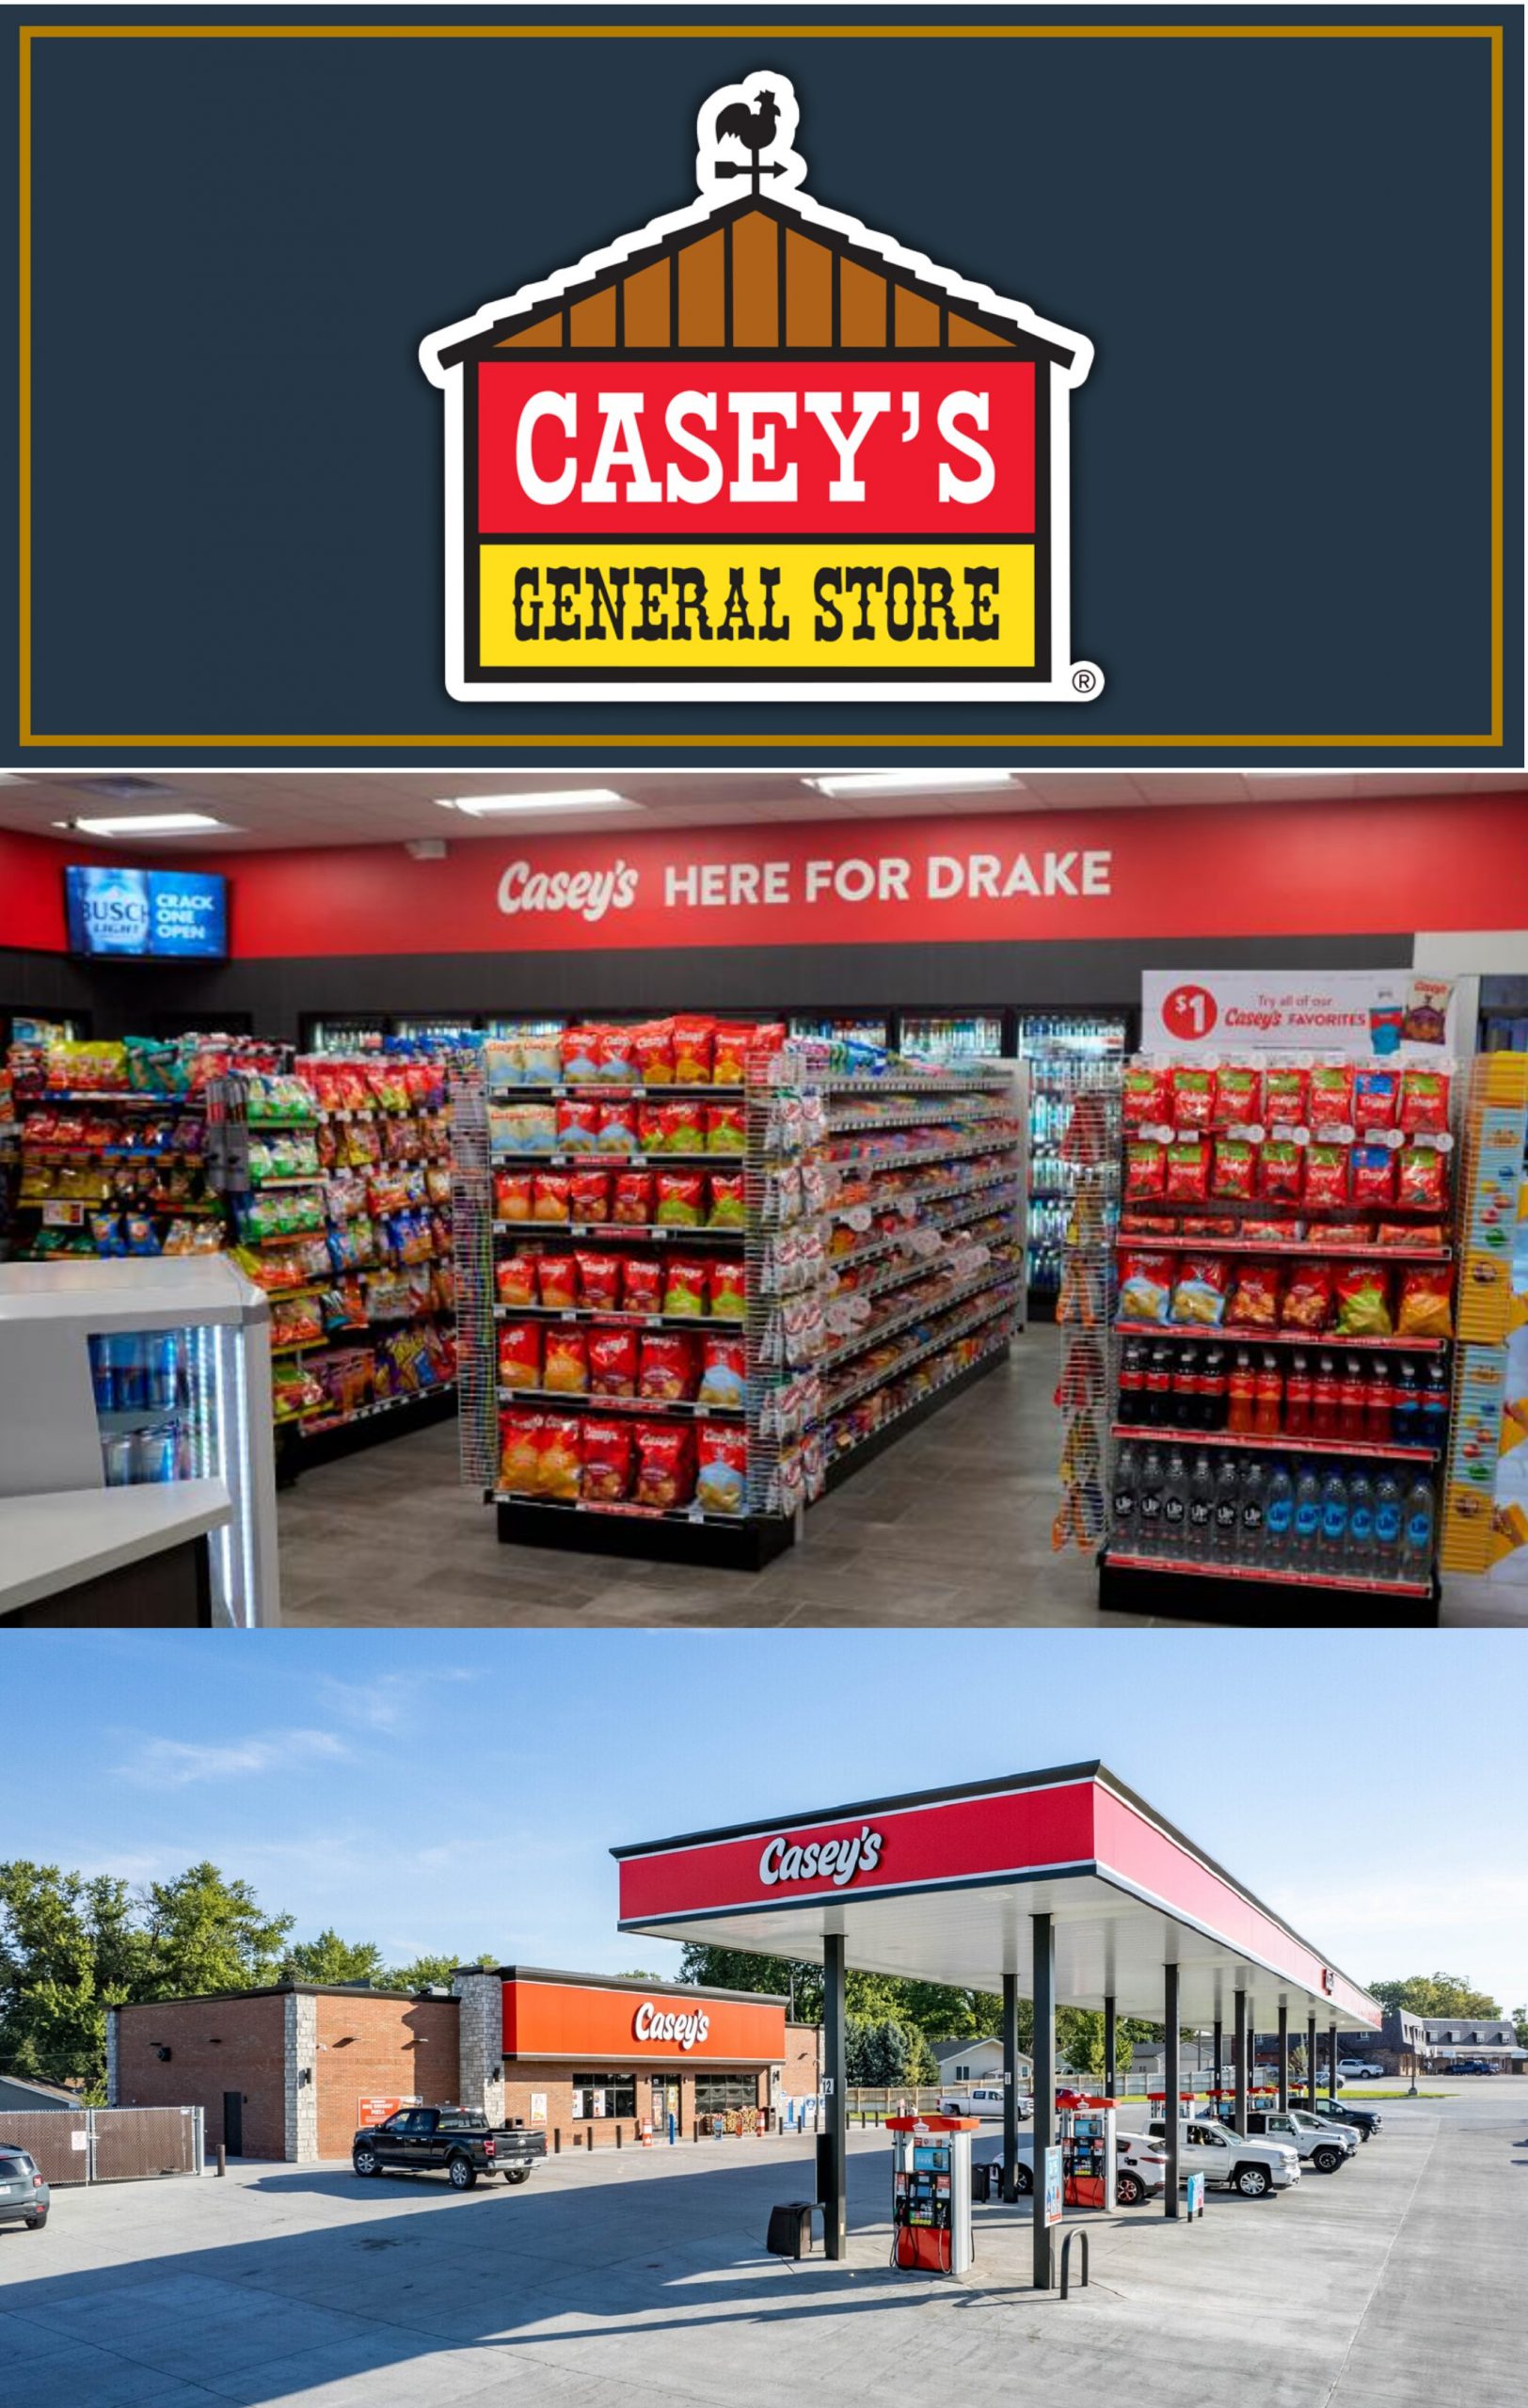 Casey’s General Store - How to Register an Account with Casey’s